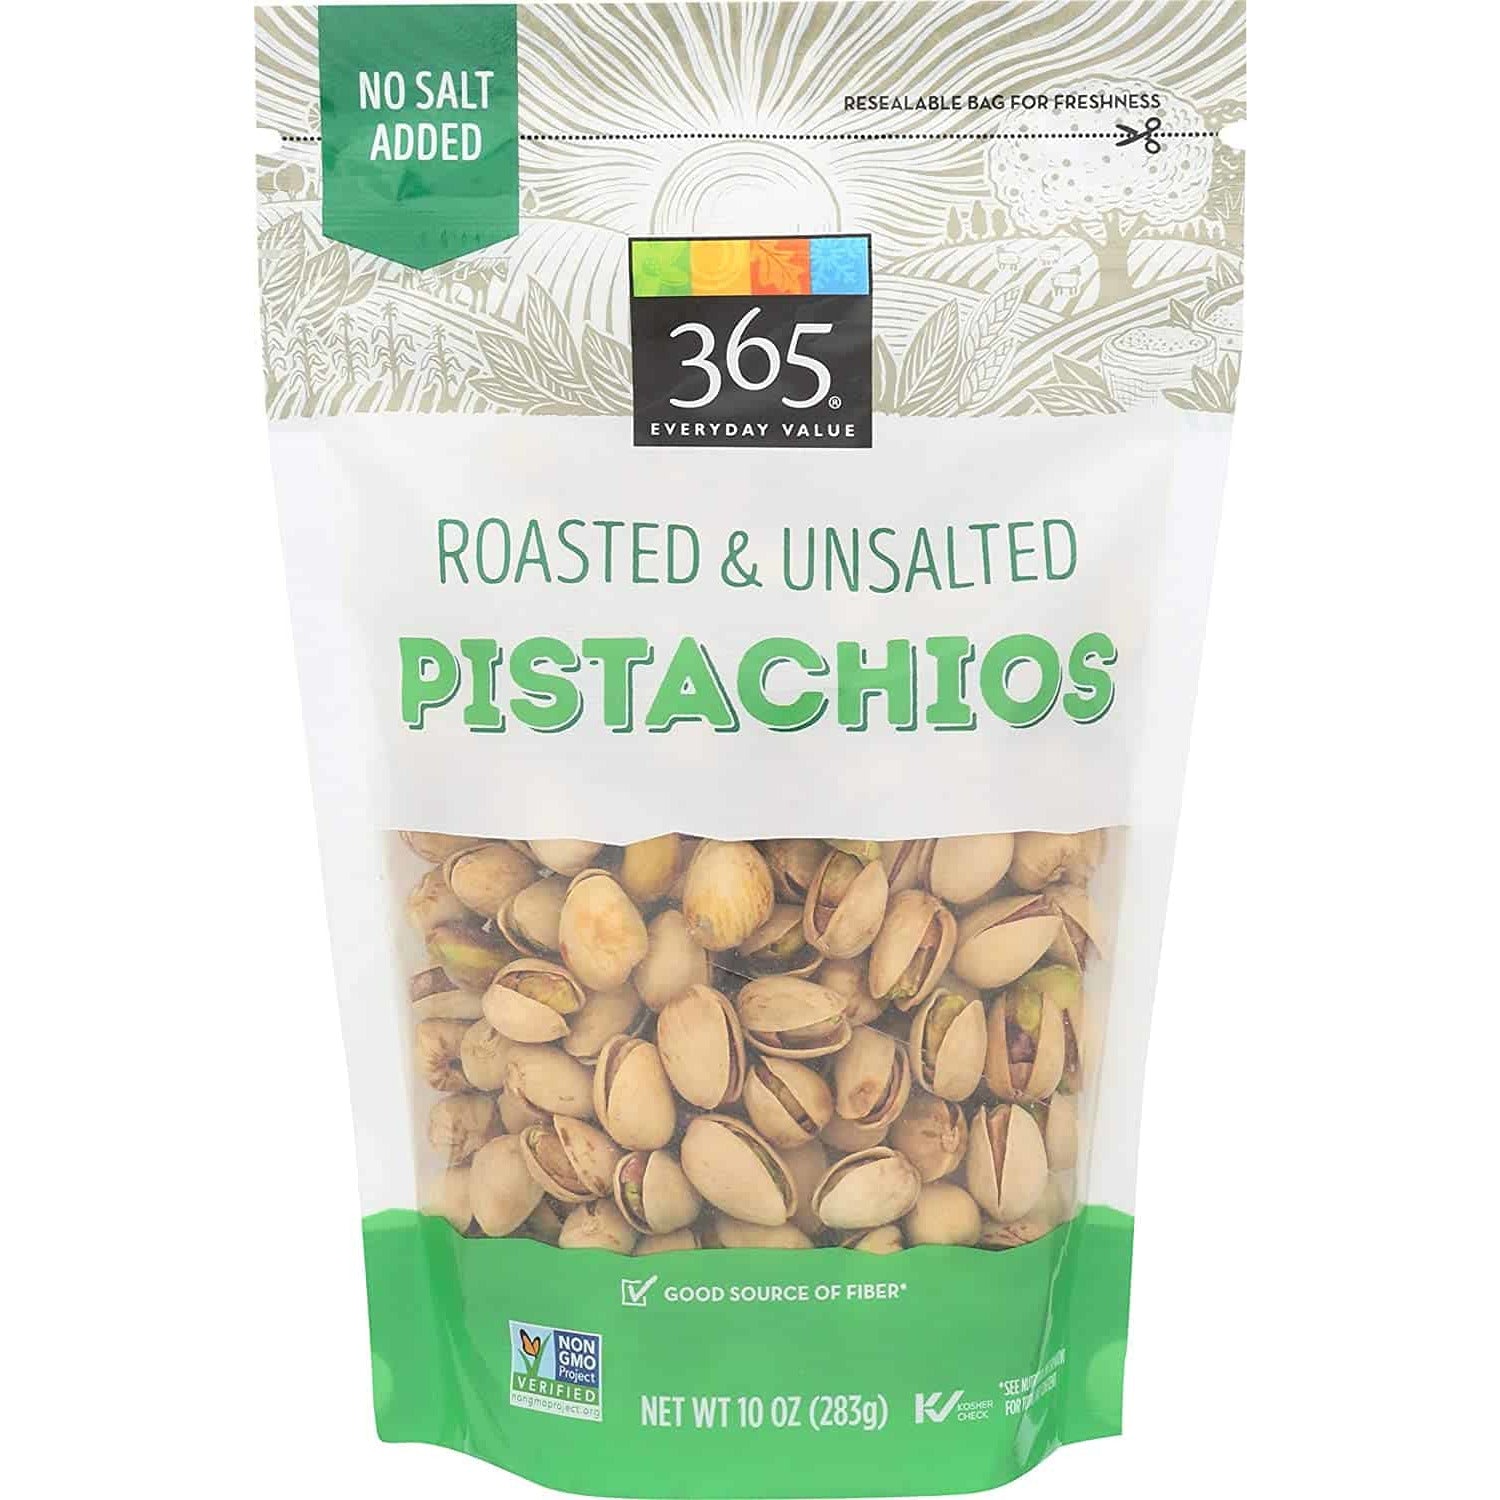 Pistachios, Roasted & Unsalted, 10 oz